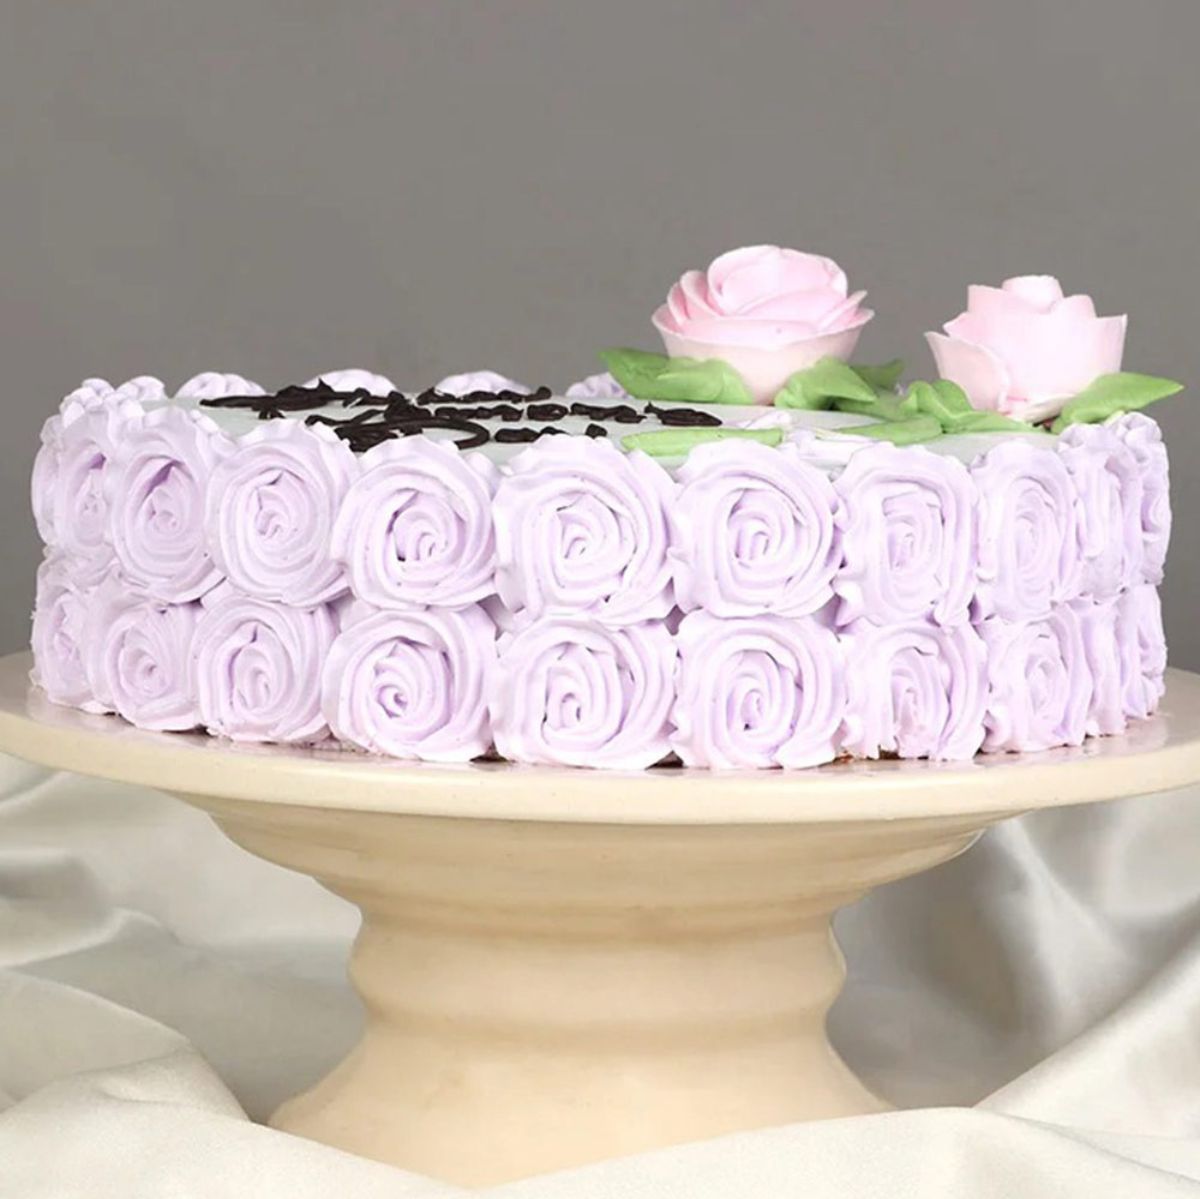 Blooming Women's Day Choco Mouse Cake